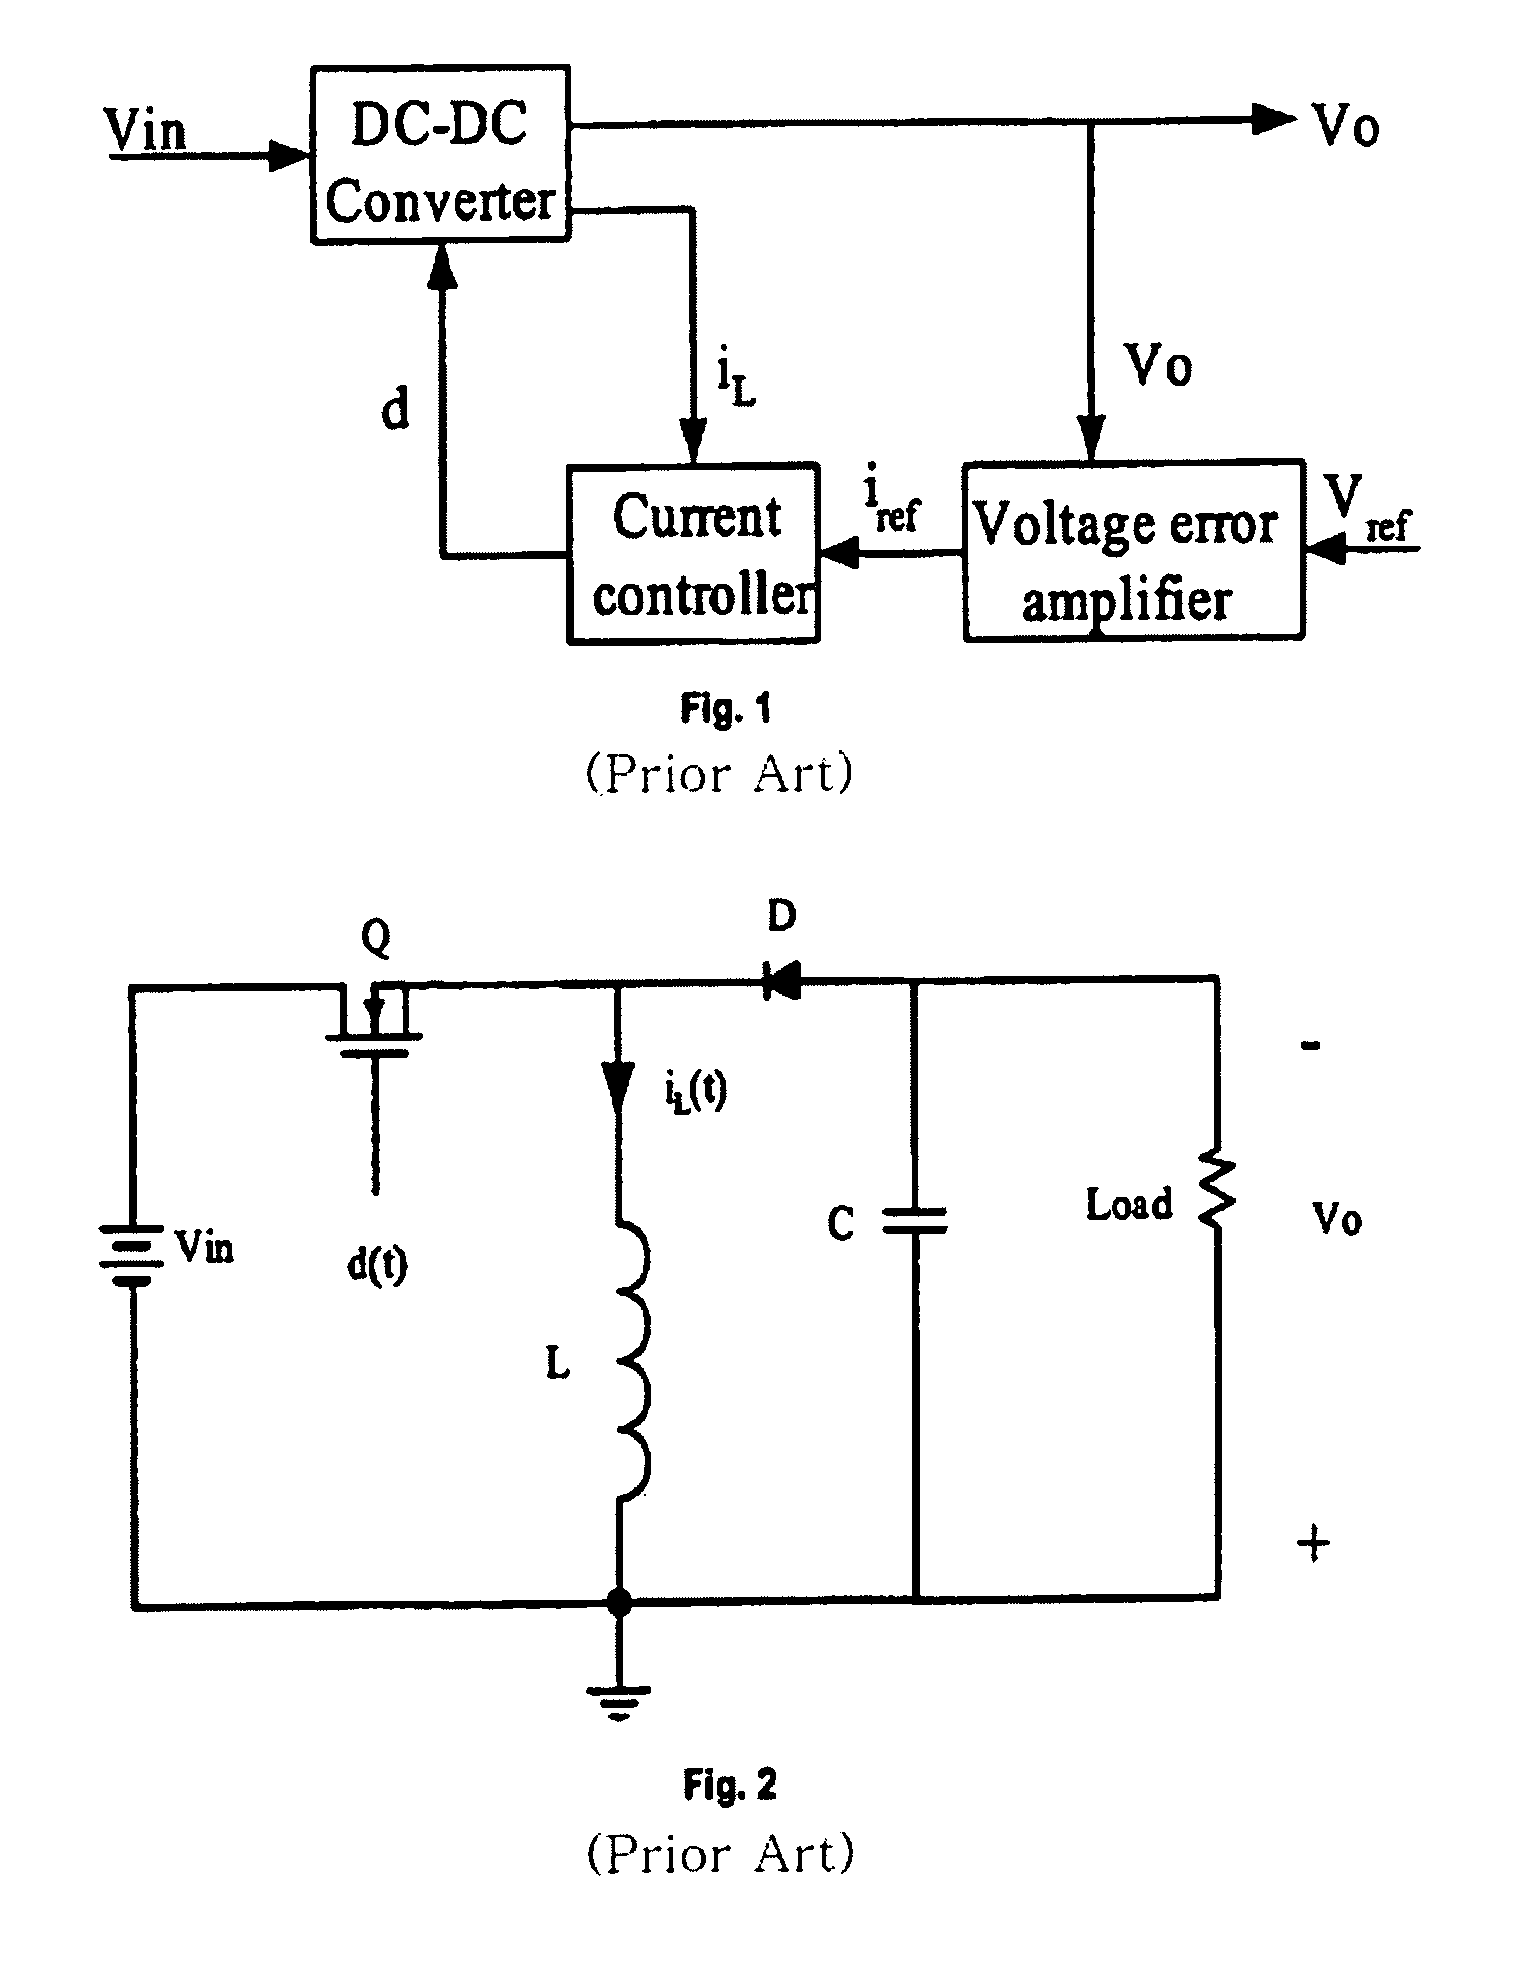 Parallel current mode control using a direct duty cycle algorithm with low computational requirements to perform power factor correction